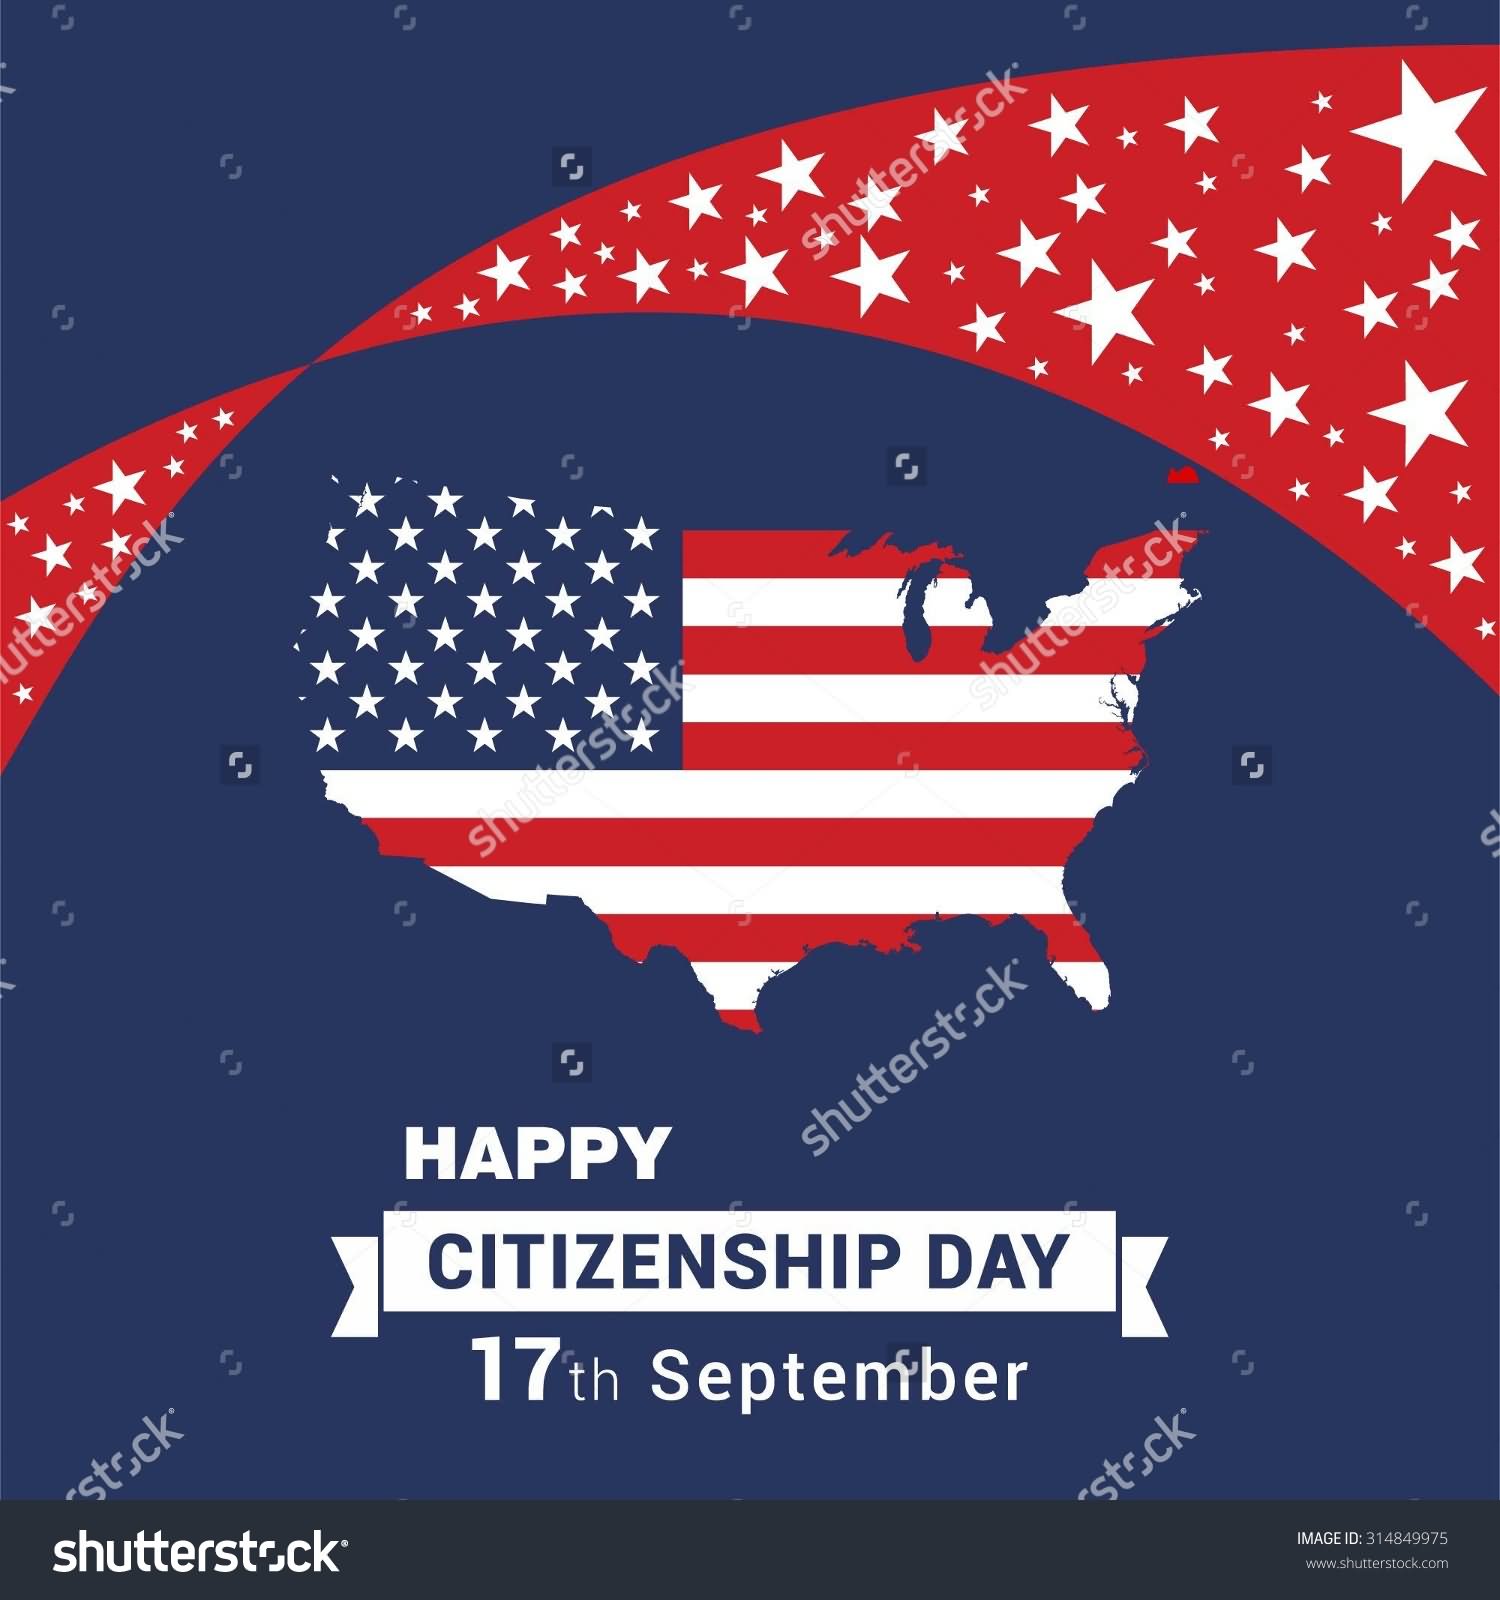 Happy Citizenship Day 17th September Picture